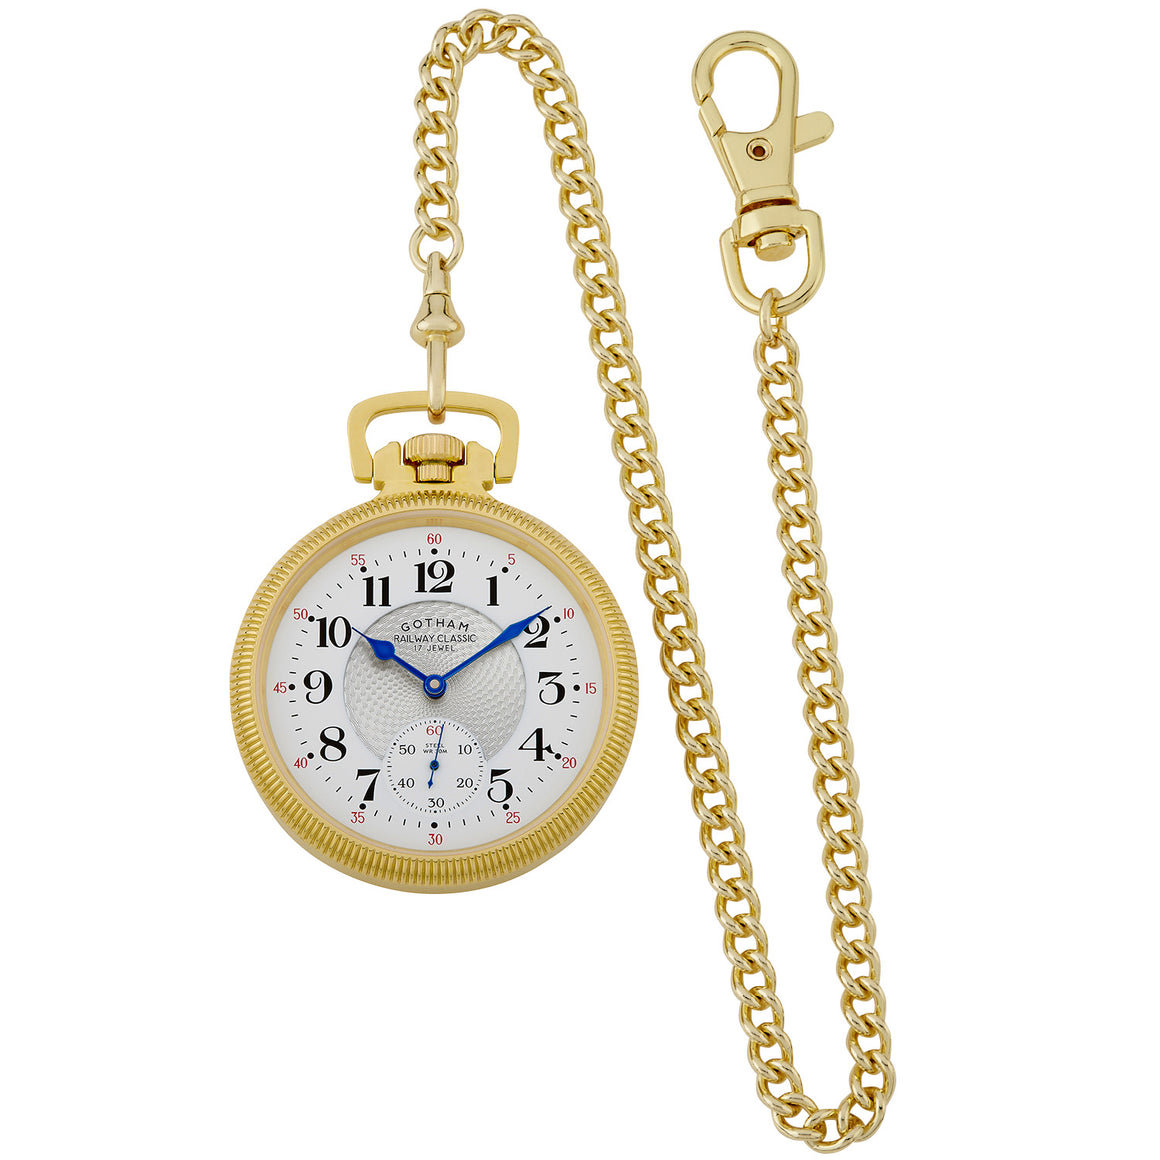 Gotham Men's Gold Plated Stainless Steel Mechanical Hand Wind Railway Classic Nostalgia Series Pocket Watch # GWC14113G